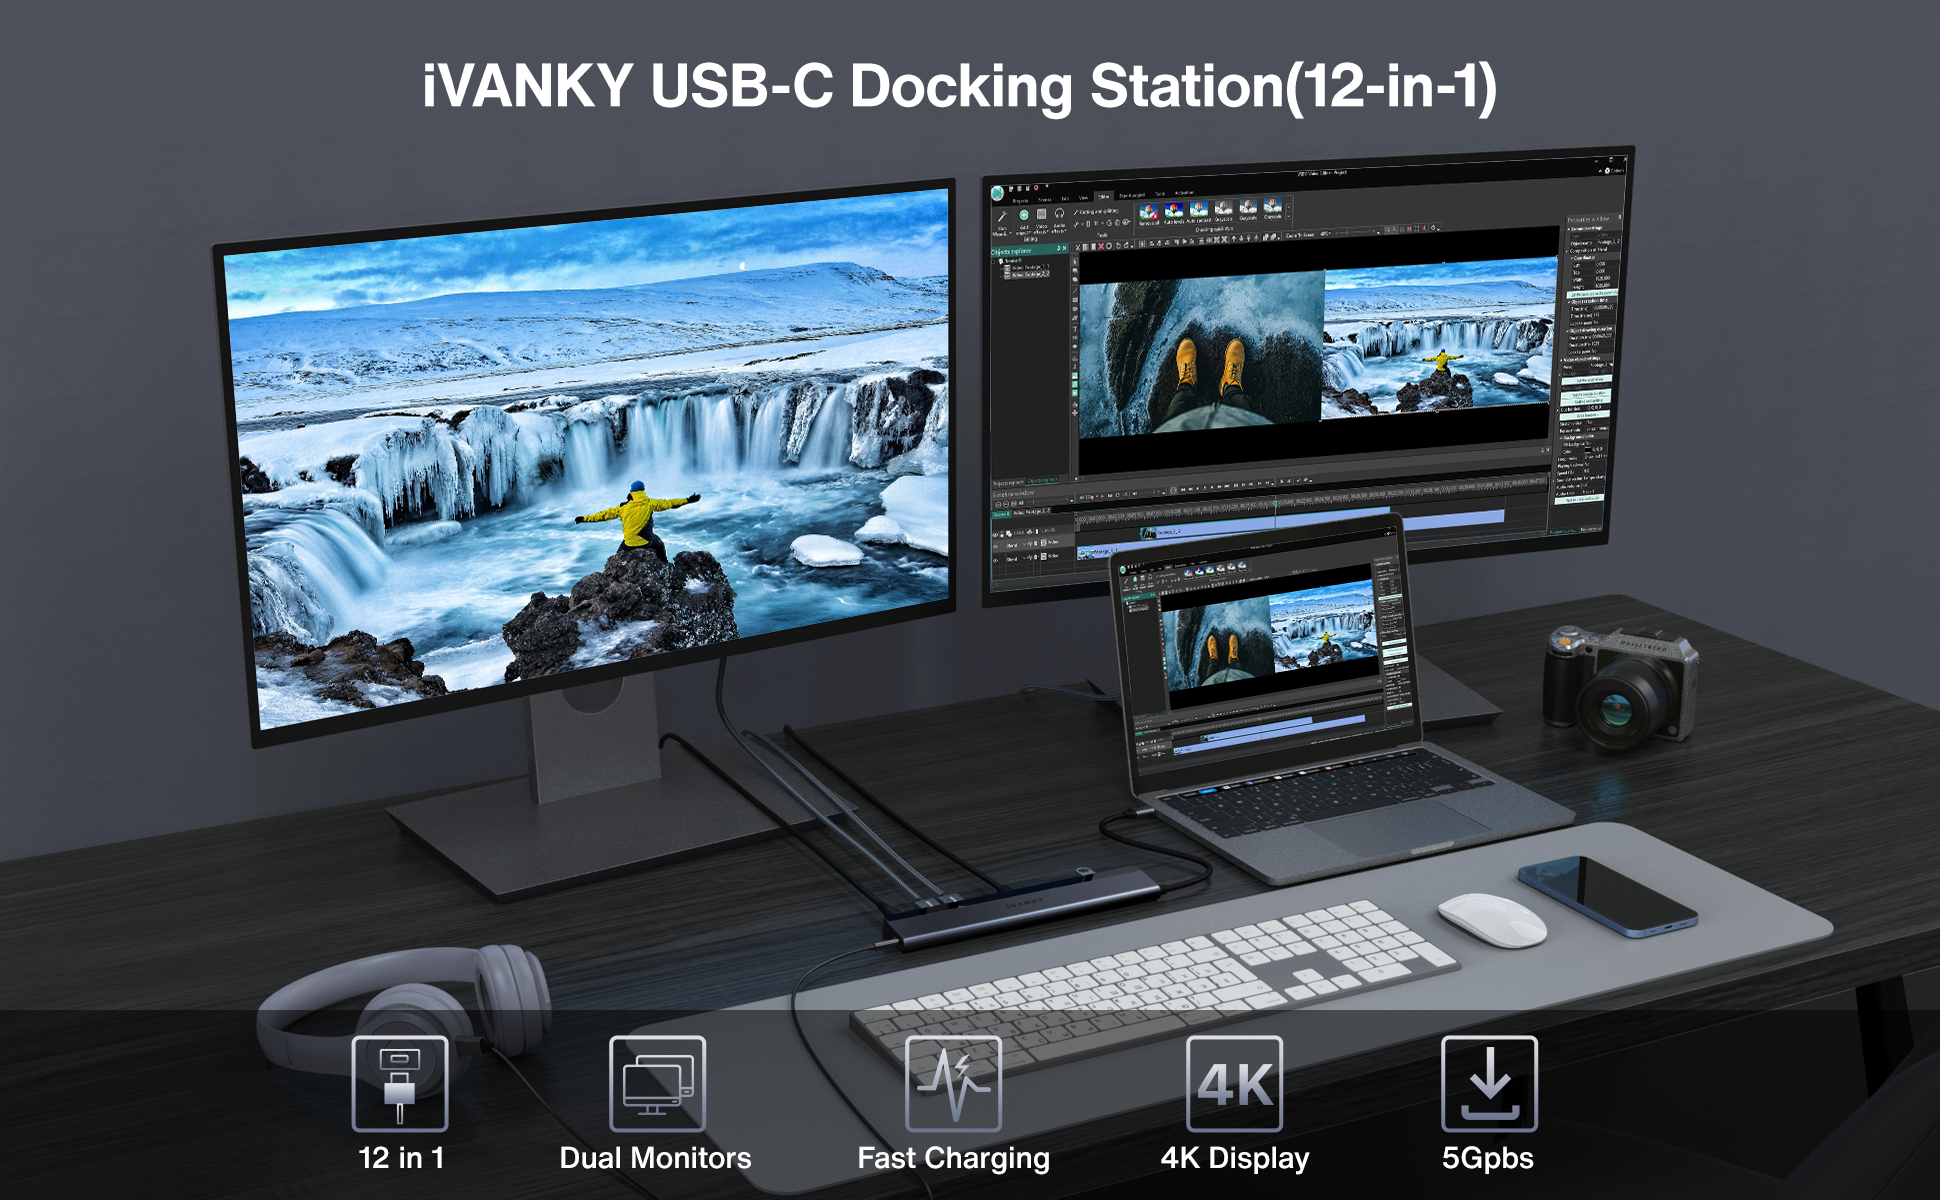 iVANKY Docking Station Classic 12-in-1 USB-C